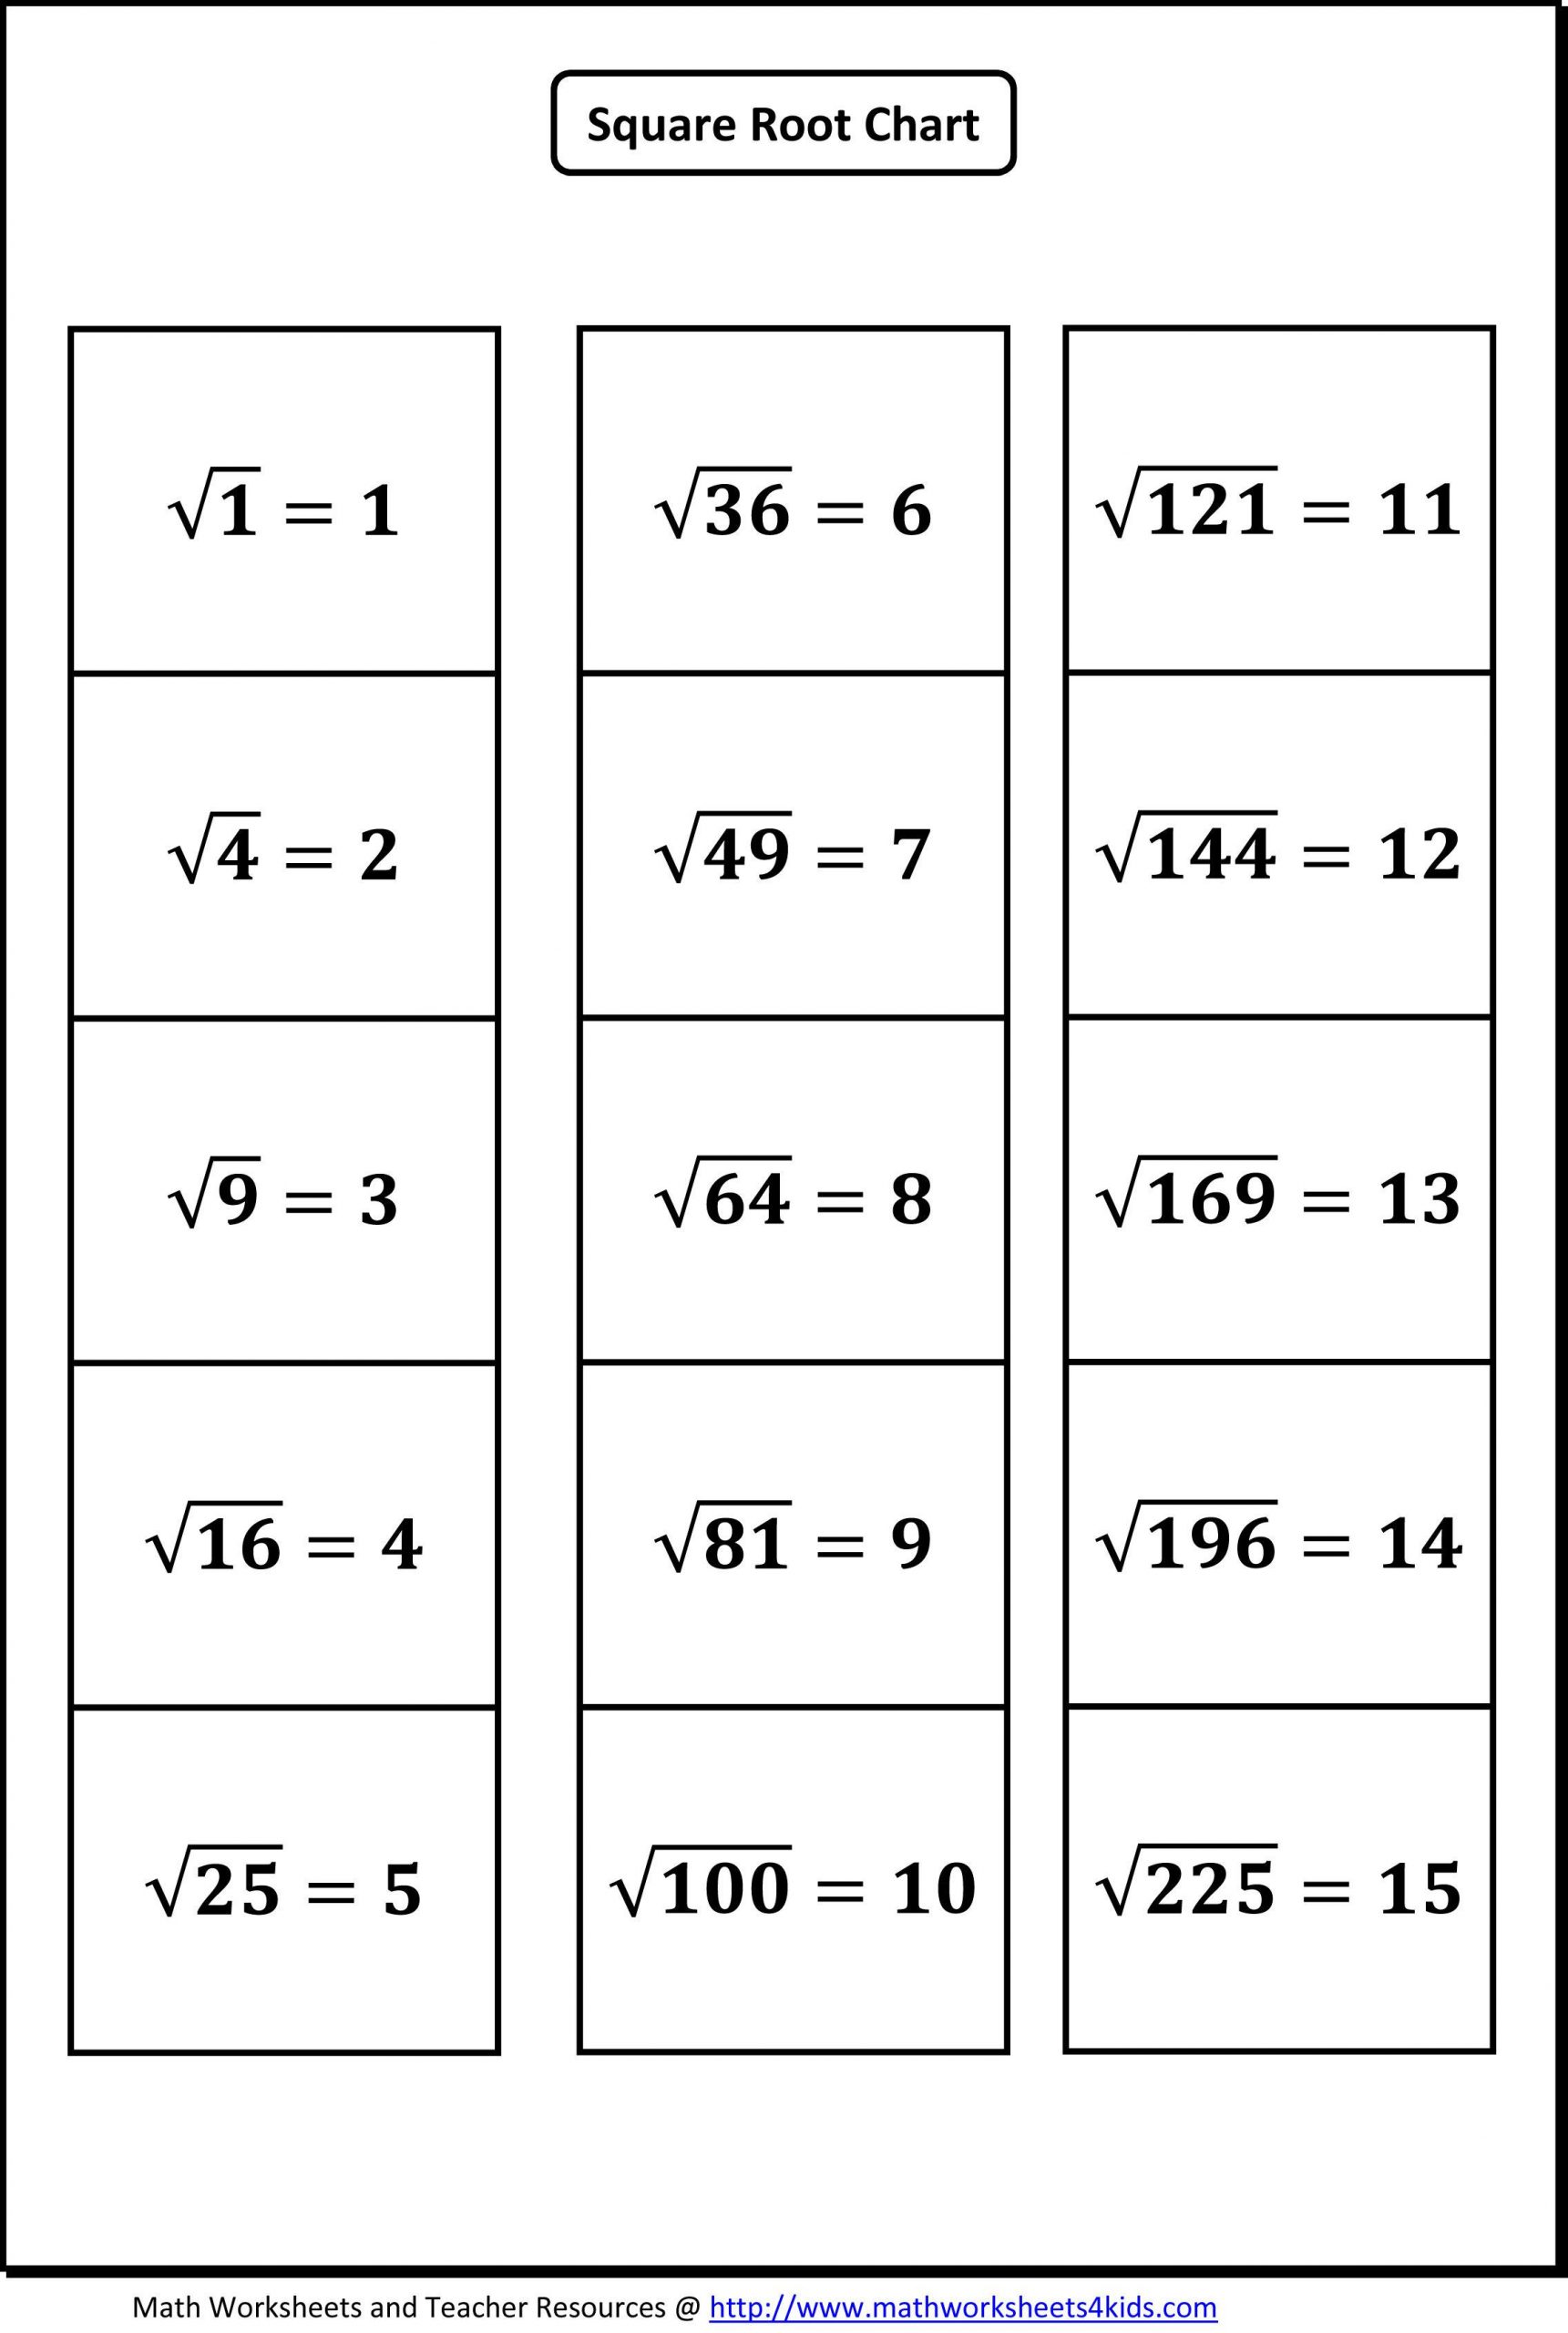 Square Root Worksheet Pdf Square Root Worksheets Find the Square Root Of whole